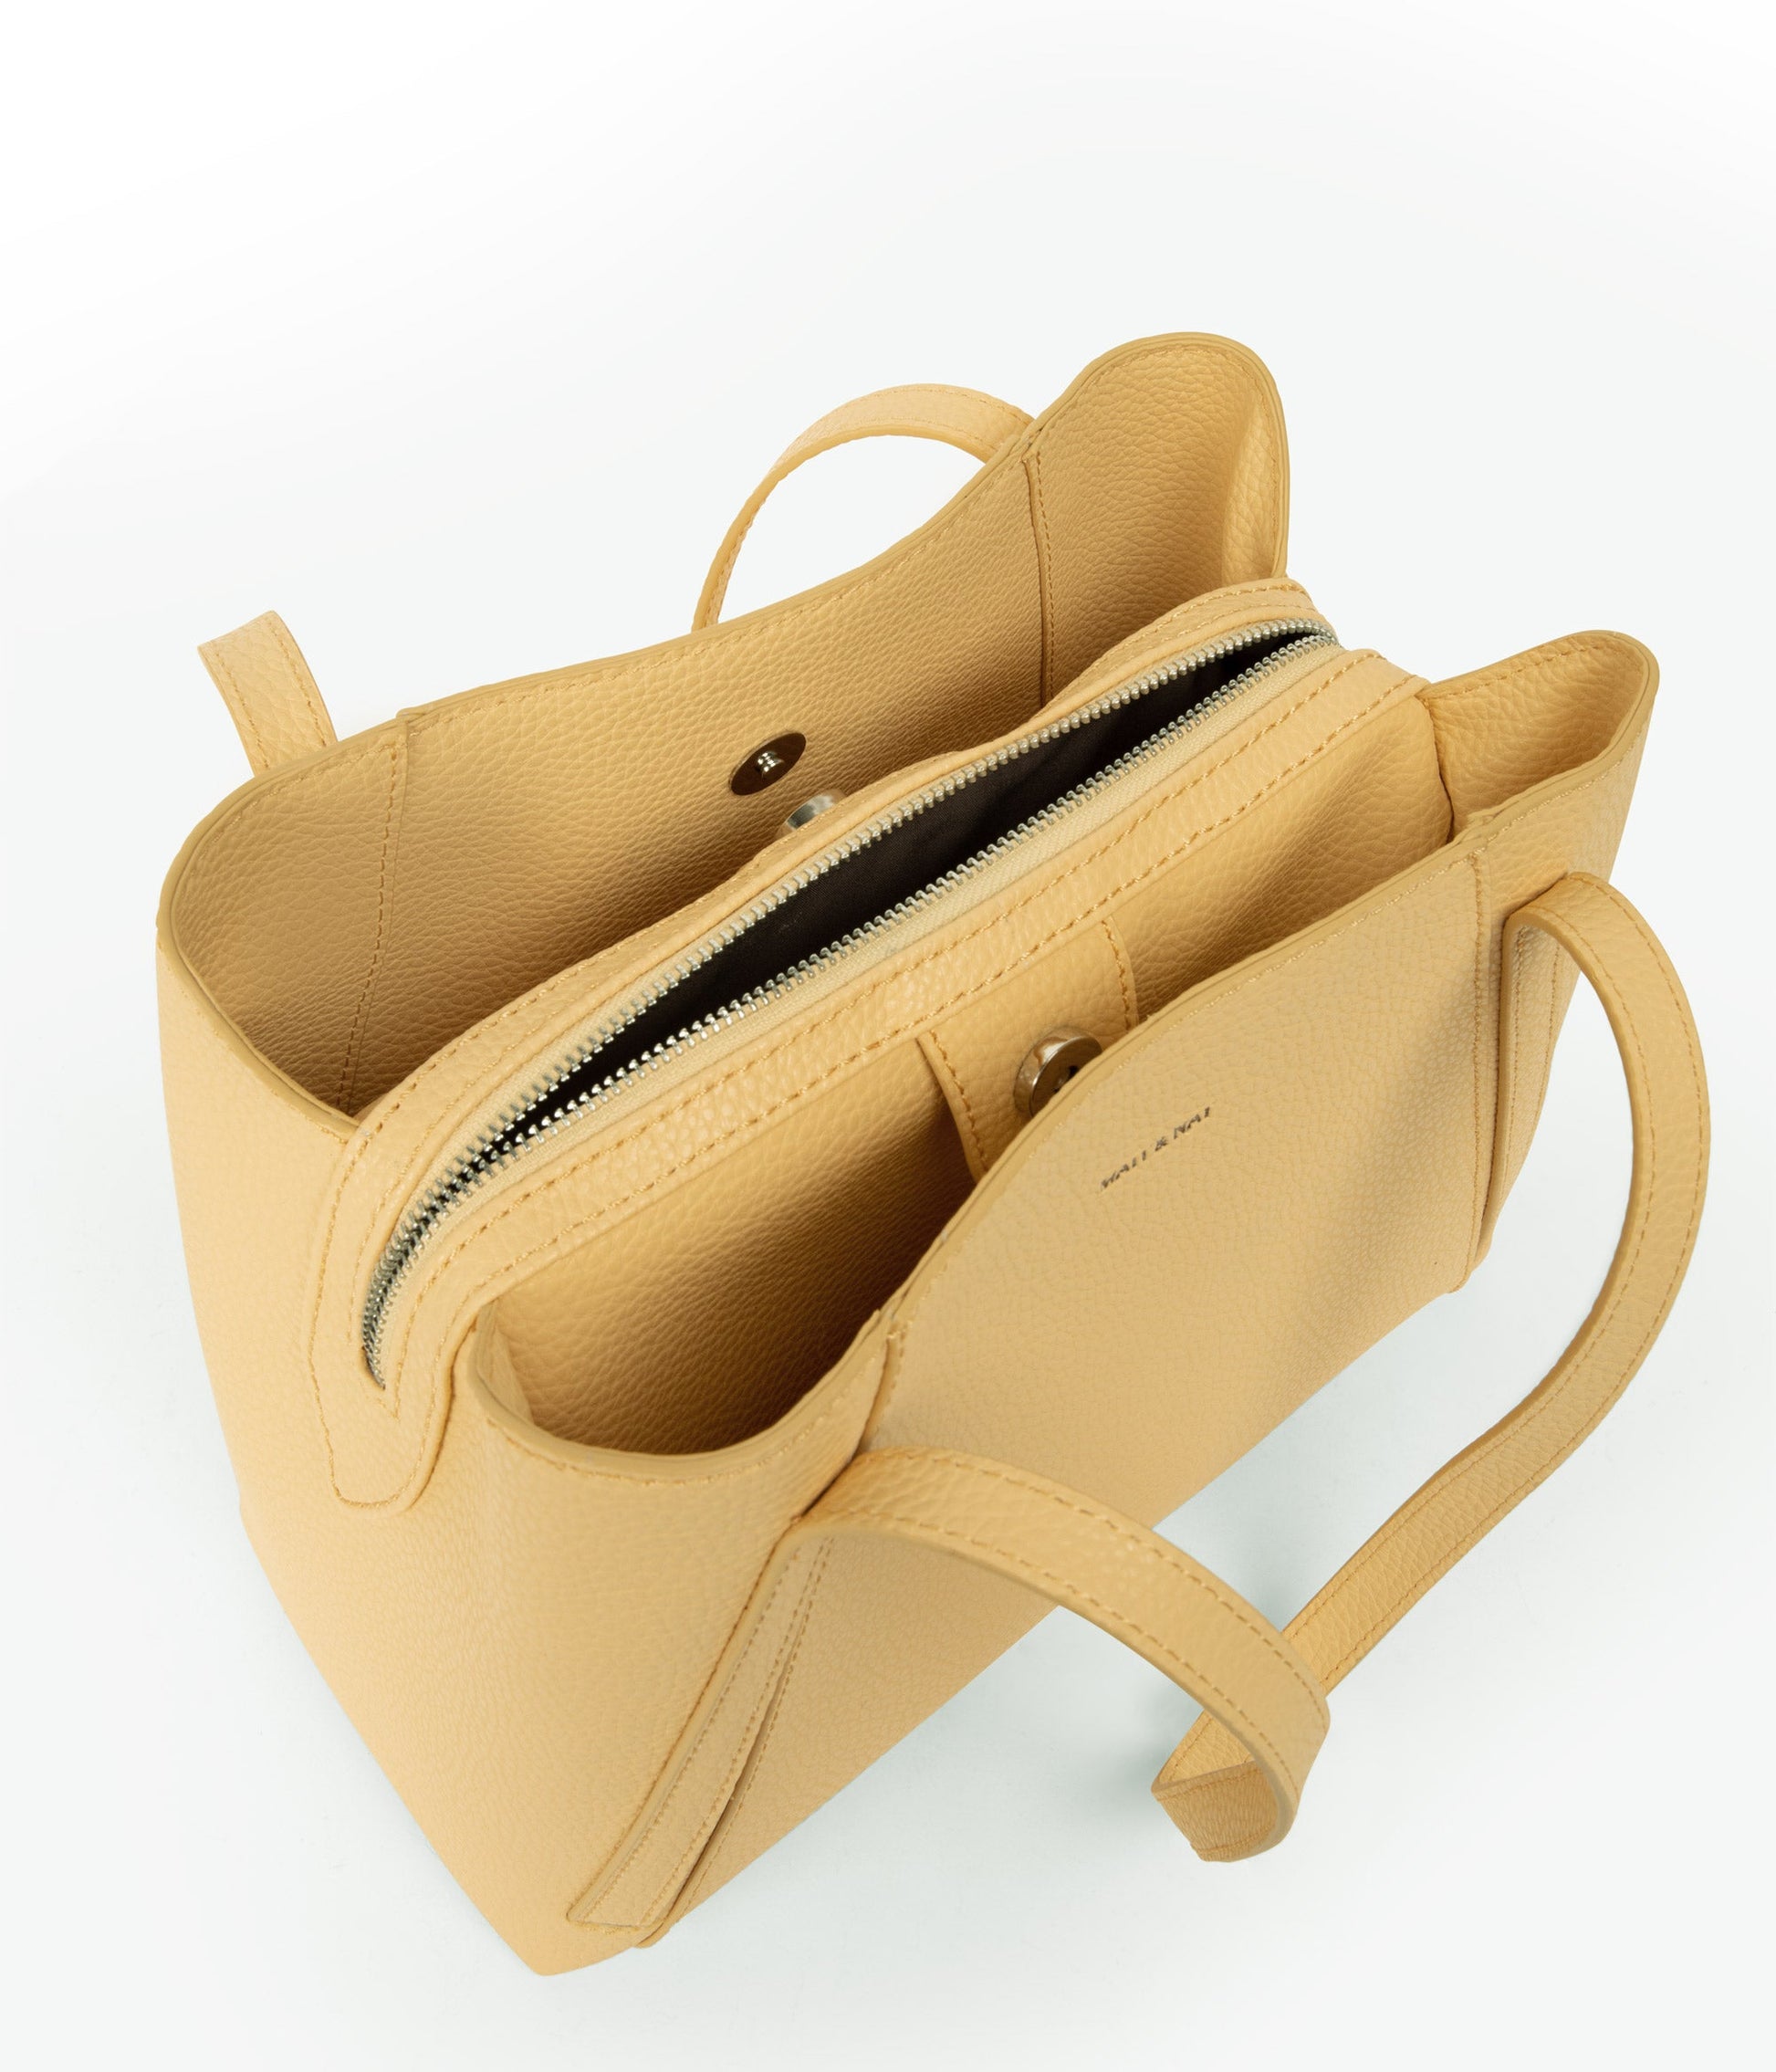 ZOEY Tote Bag - Purity | Color: Yellow - variant::zest